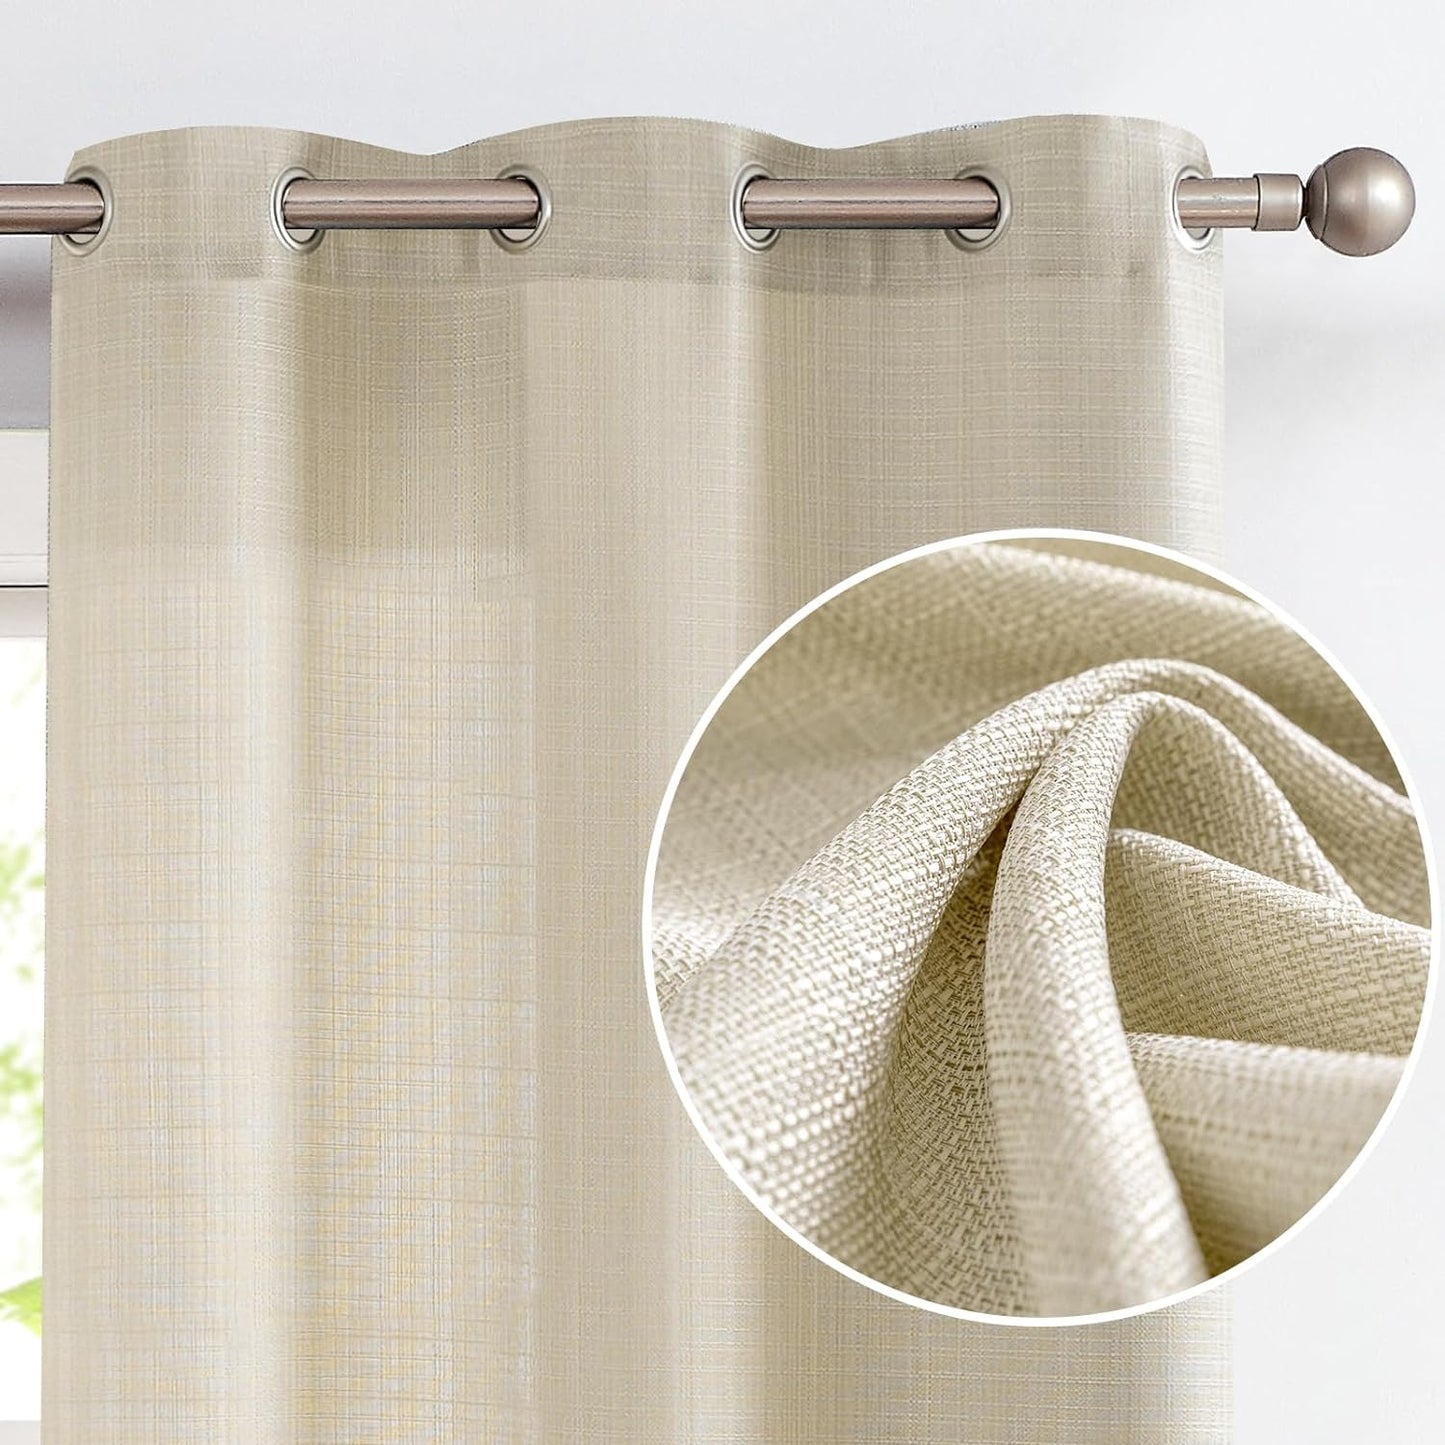 COLLACT White Linen Textured Curtains 84 Inch Length 2 Panels for Living Room Casual Weave Light Filtering Semi Sheer Curtains & Drapes for Bedroom Grommet Top Window Treatments, W38 X L84, White  COLLACT Grommet | Heathered Beige W38 X L72 